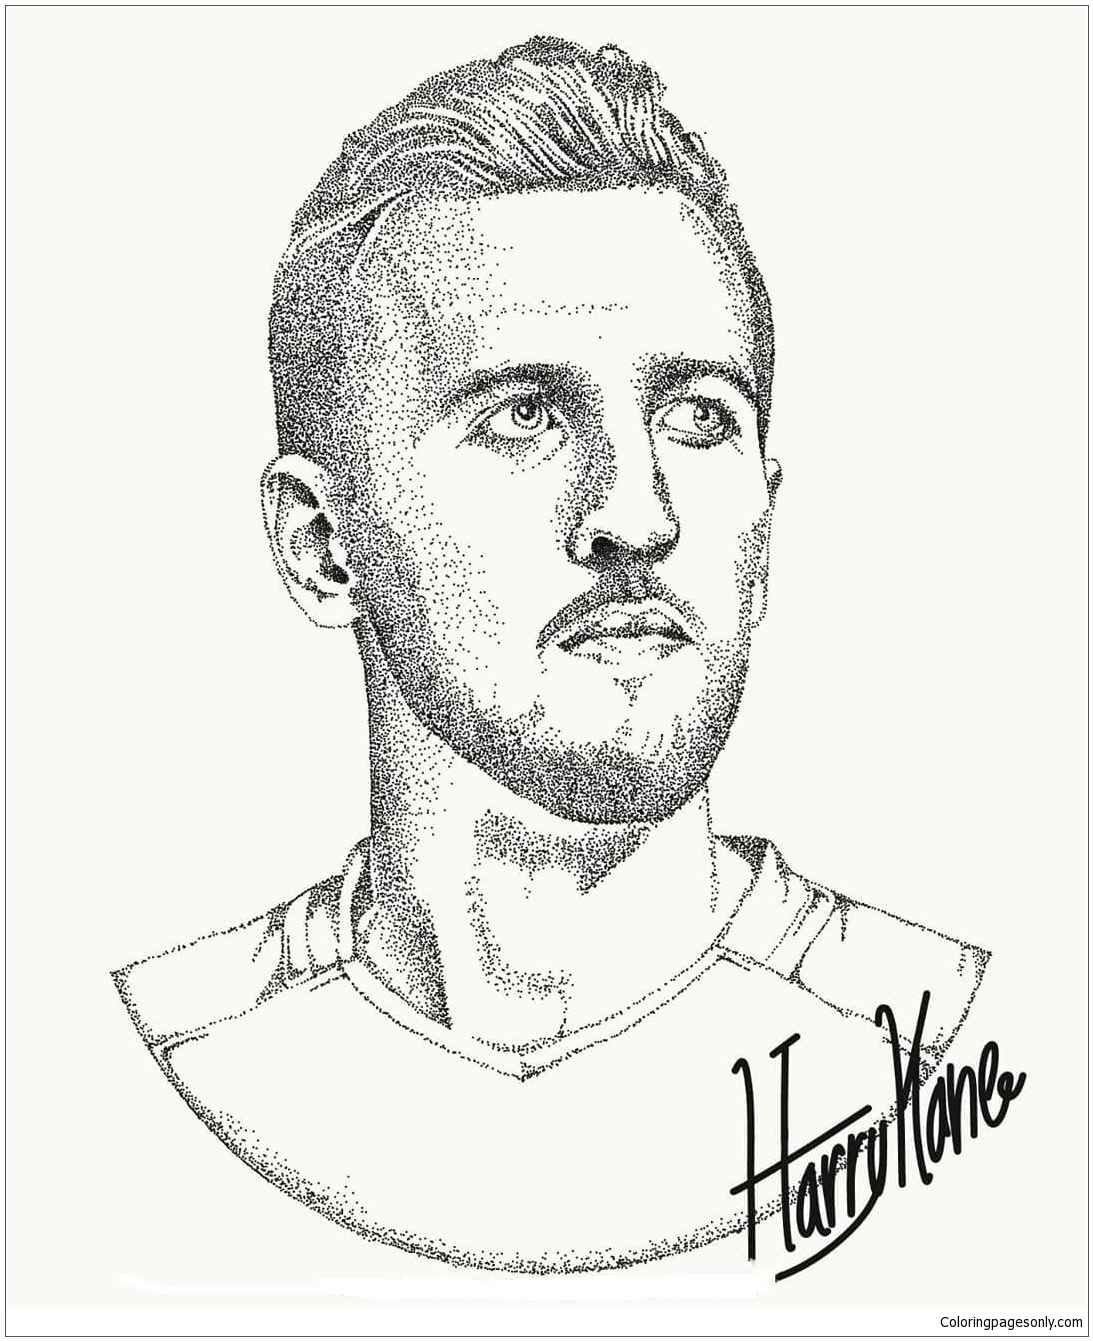 Harry Kane-image 9 Coloring Page